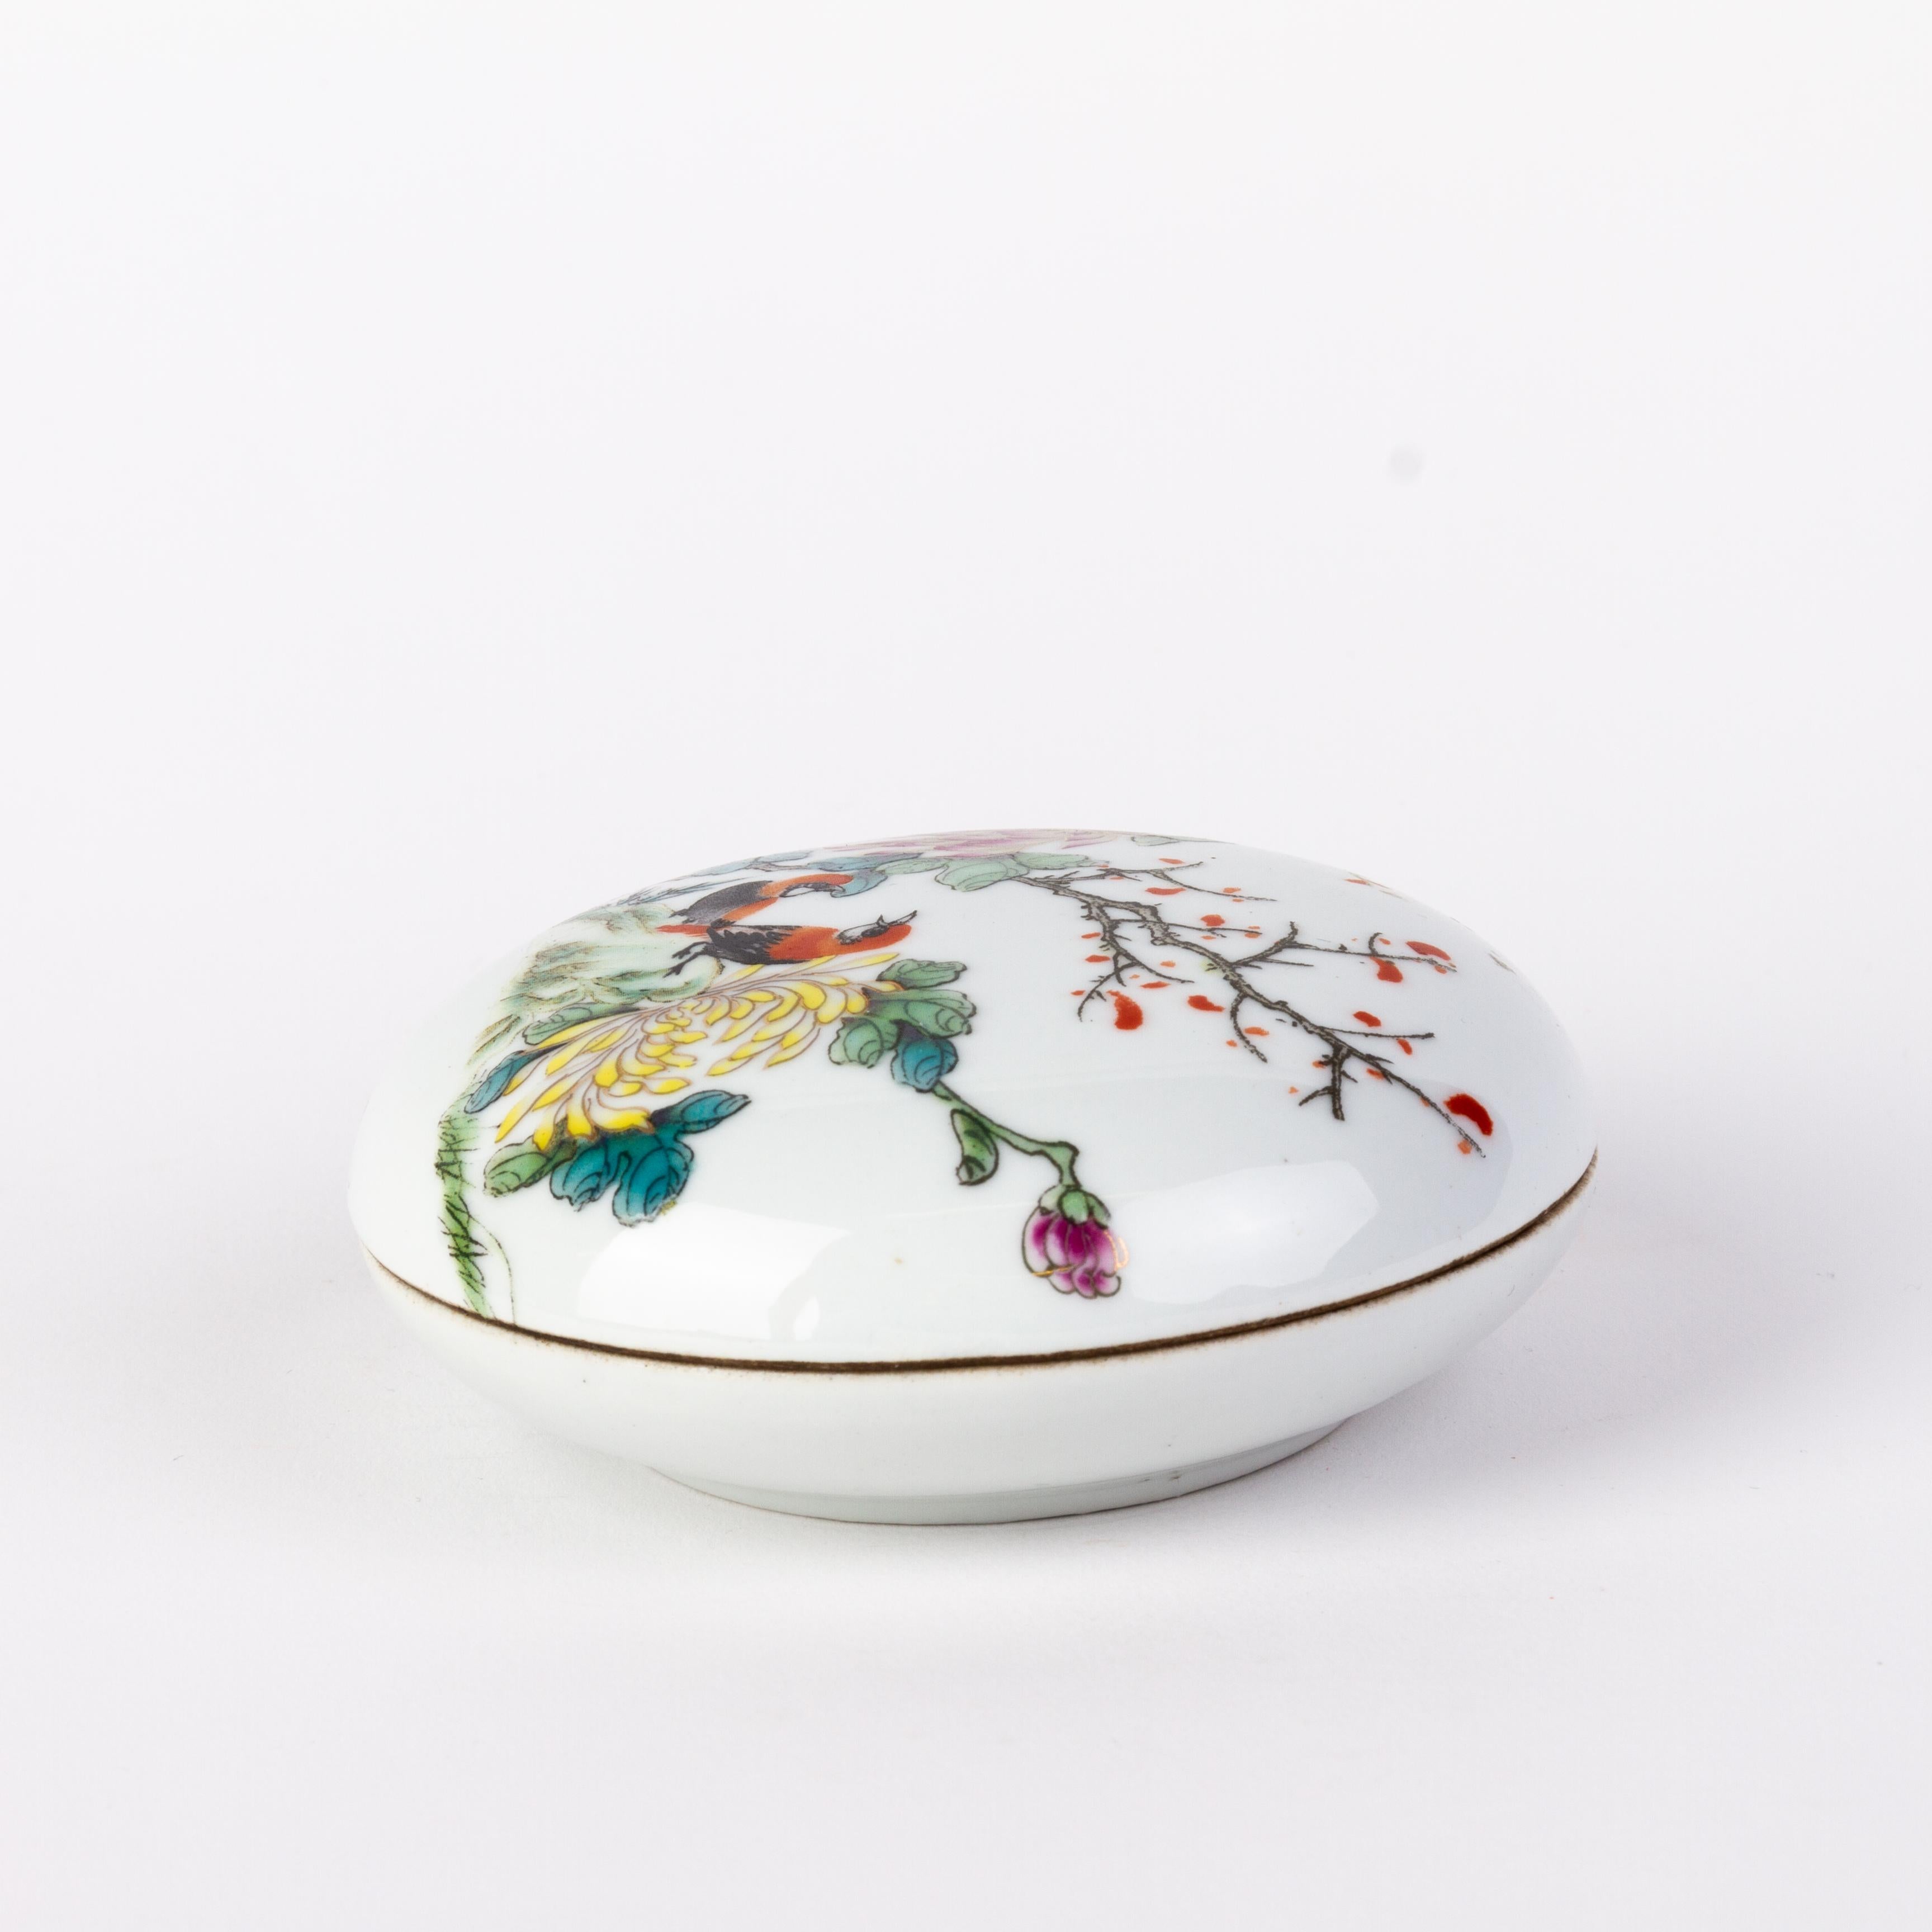 20th Century Chinese Republic Period Famille Rose Birds & Blossoms Porcelain Lidded Box 